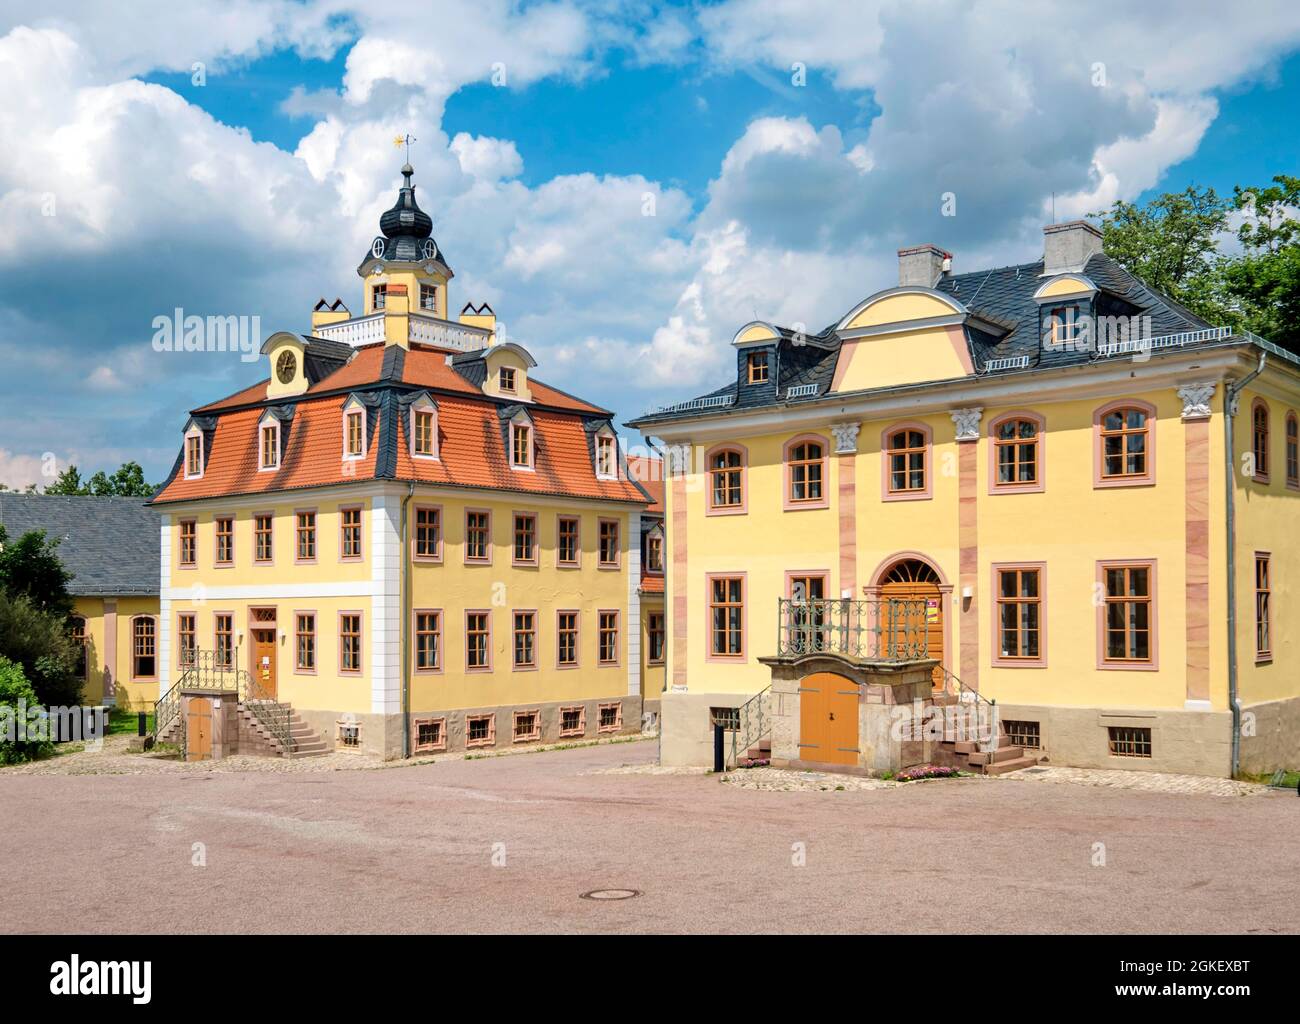 Cavalier houses, Belvedere Palace, Weimar, Thuringia, Germany Stock Photo